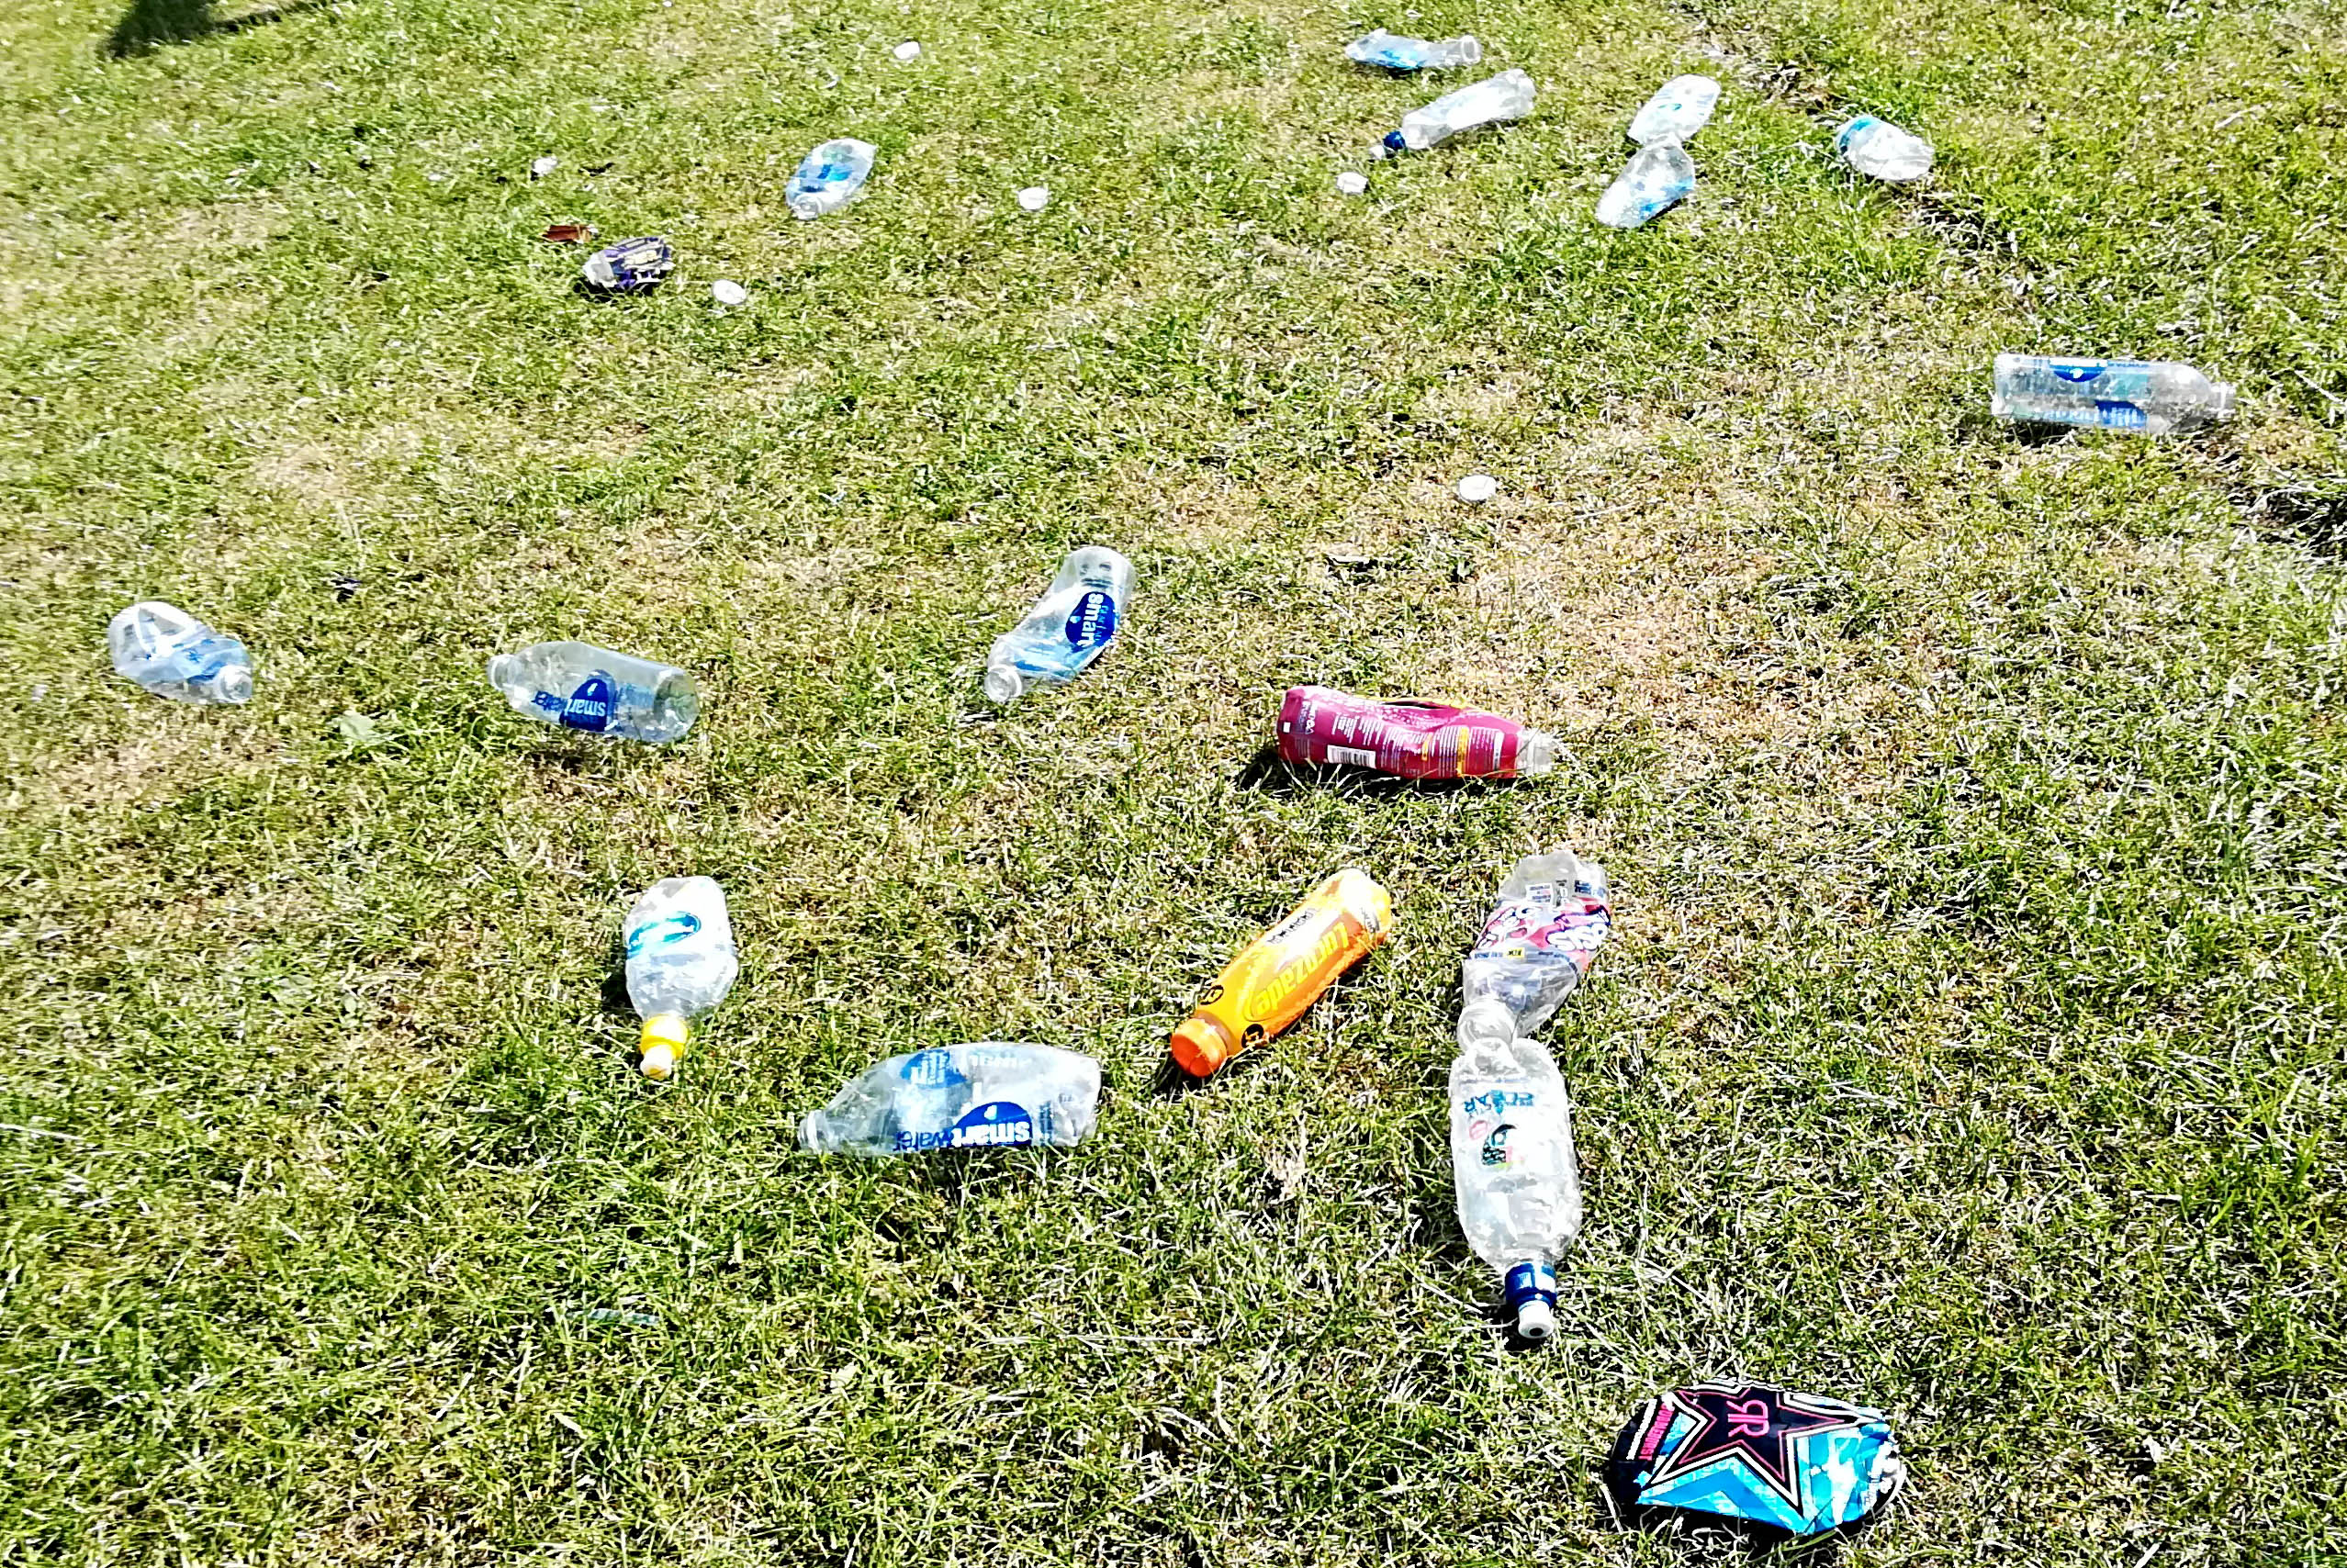 Please Stop Dropping Litter